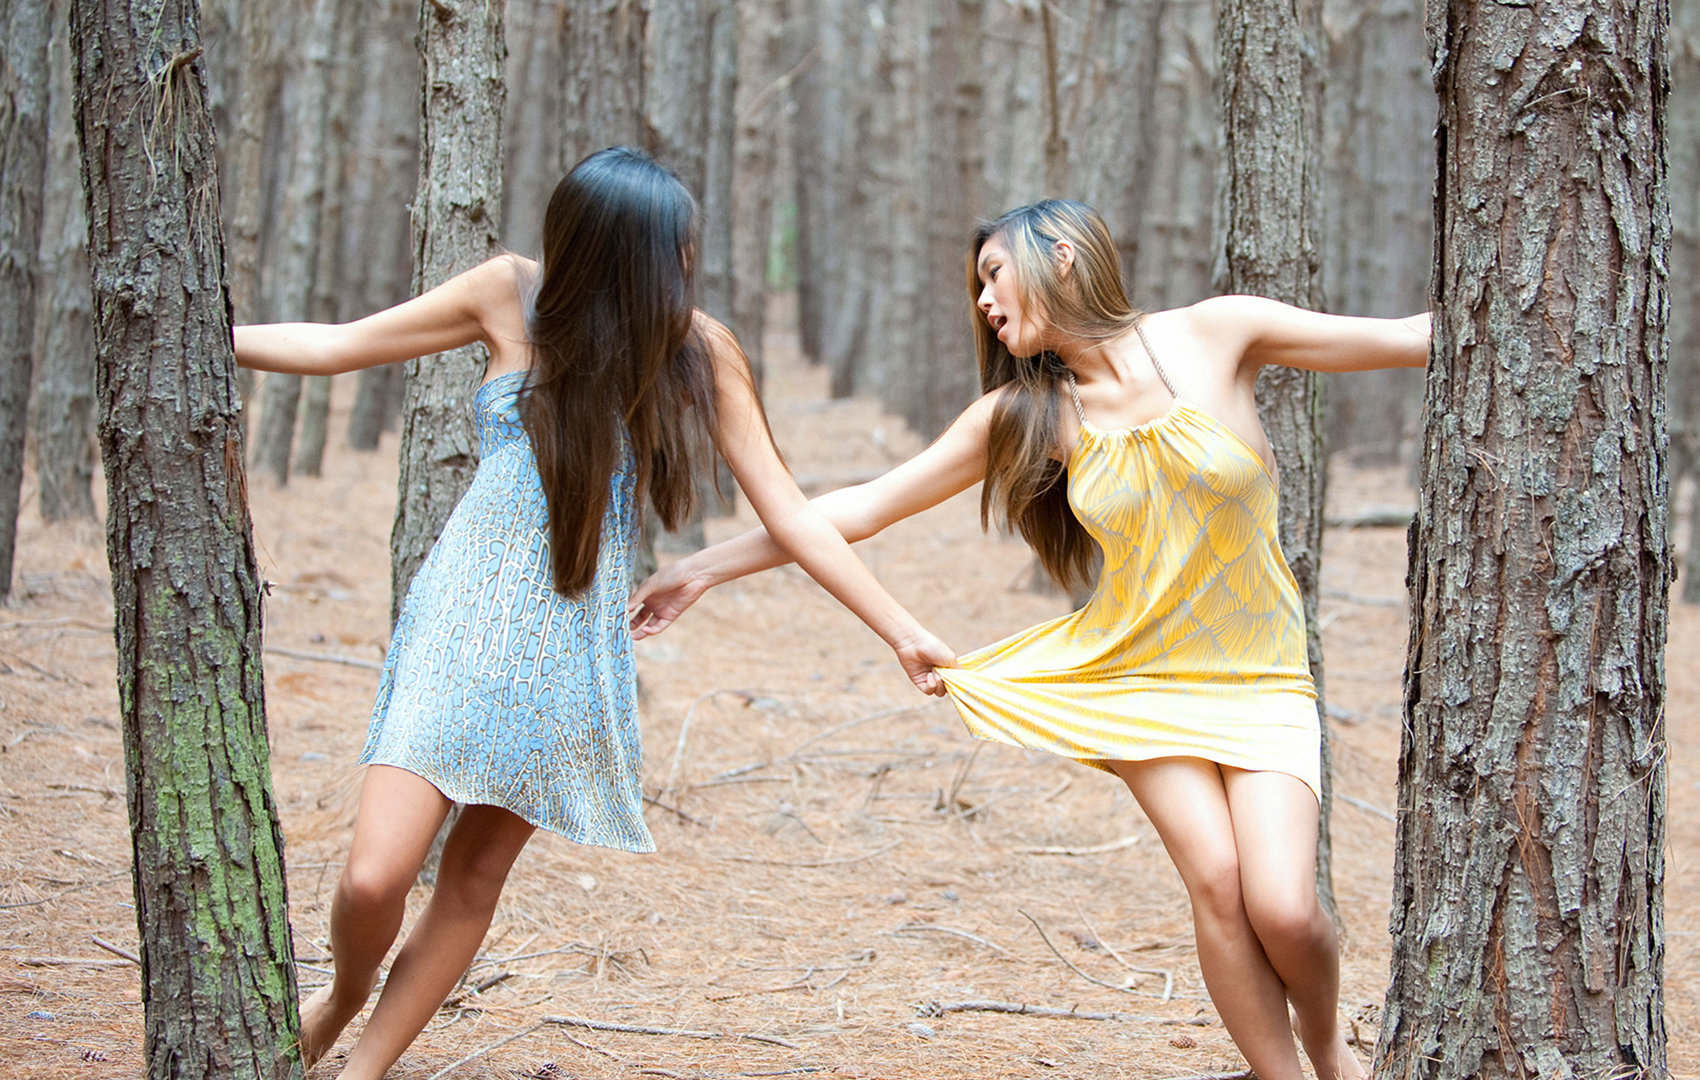 Sisters in the woods play with their dresses.